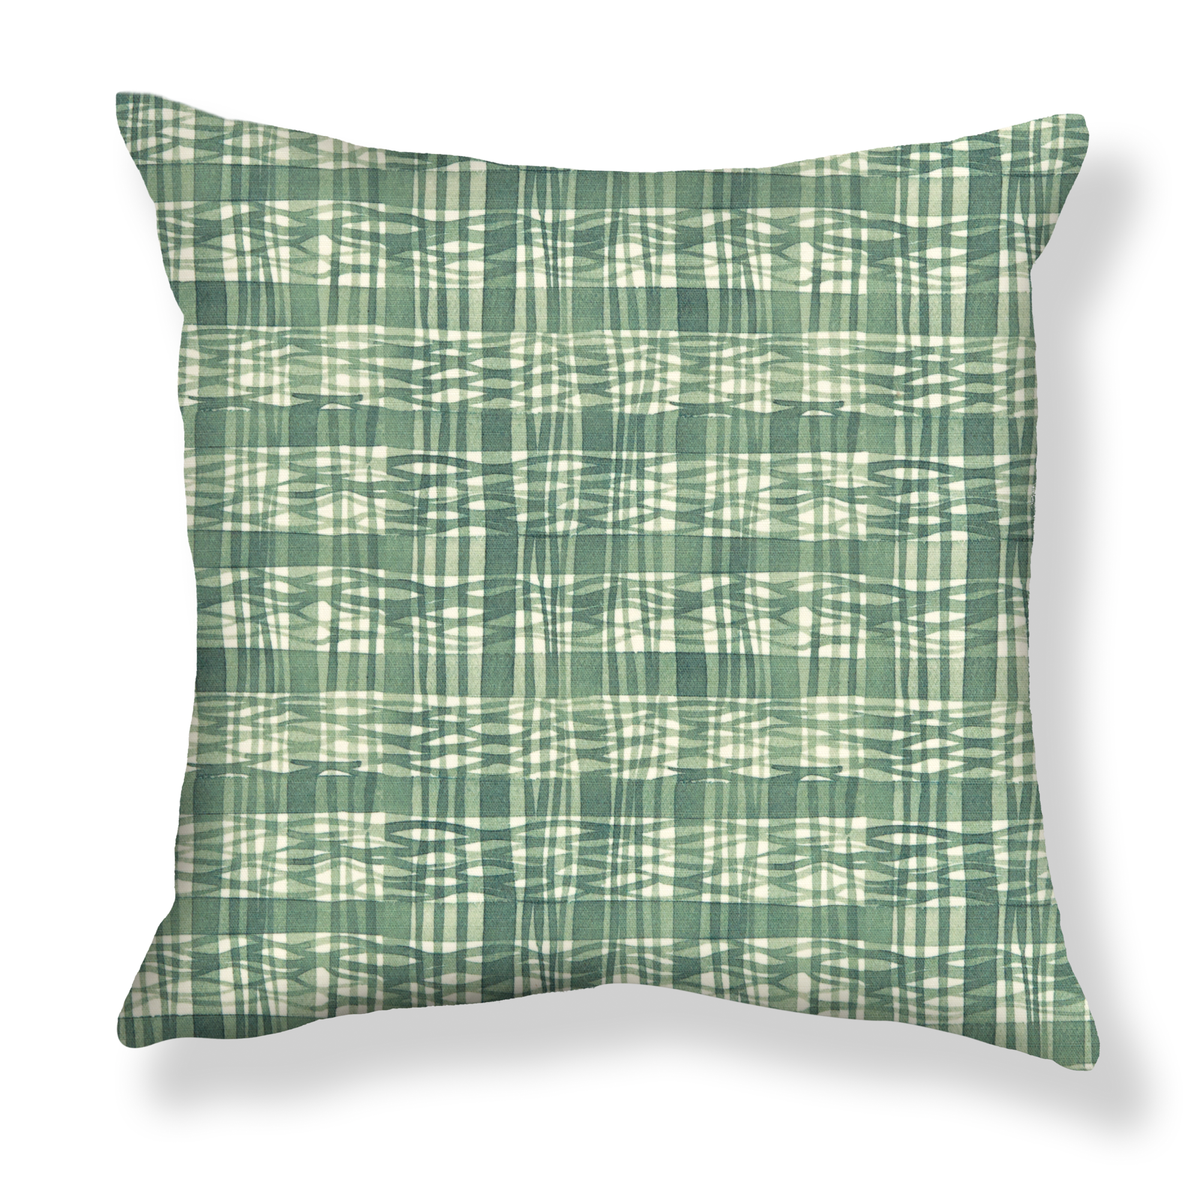 Thatched Pillow in Leafy Green